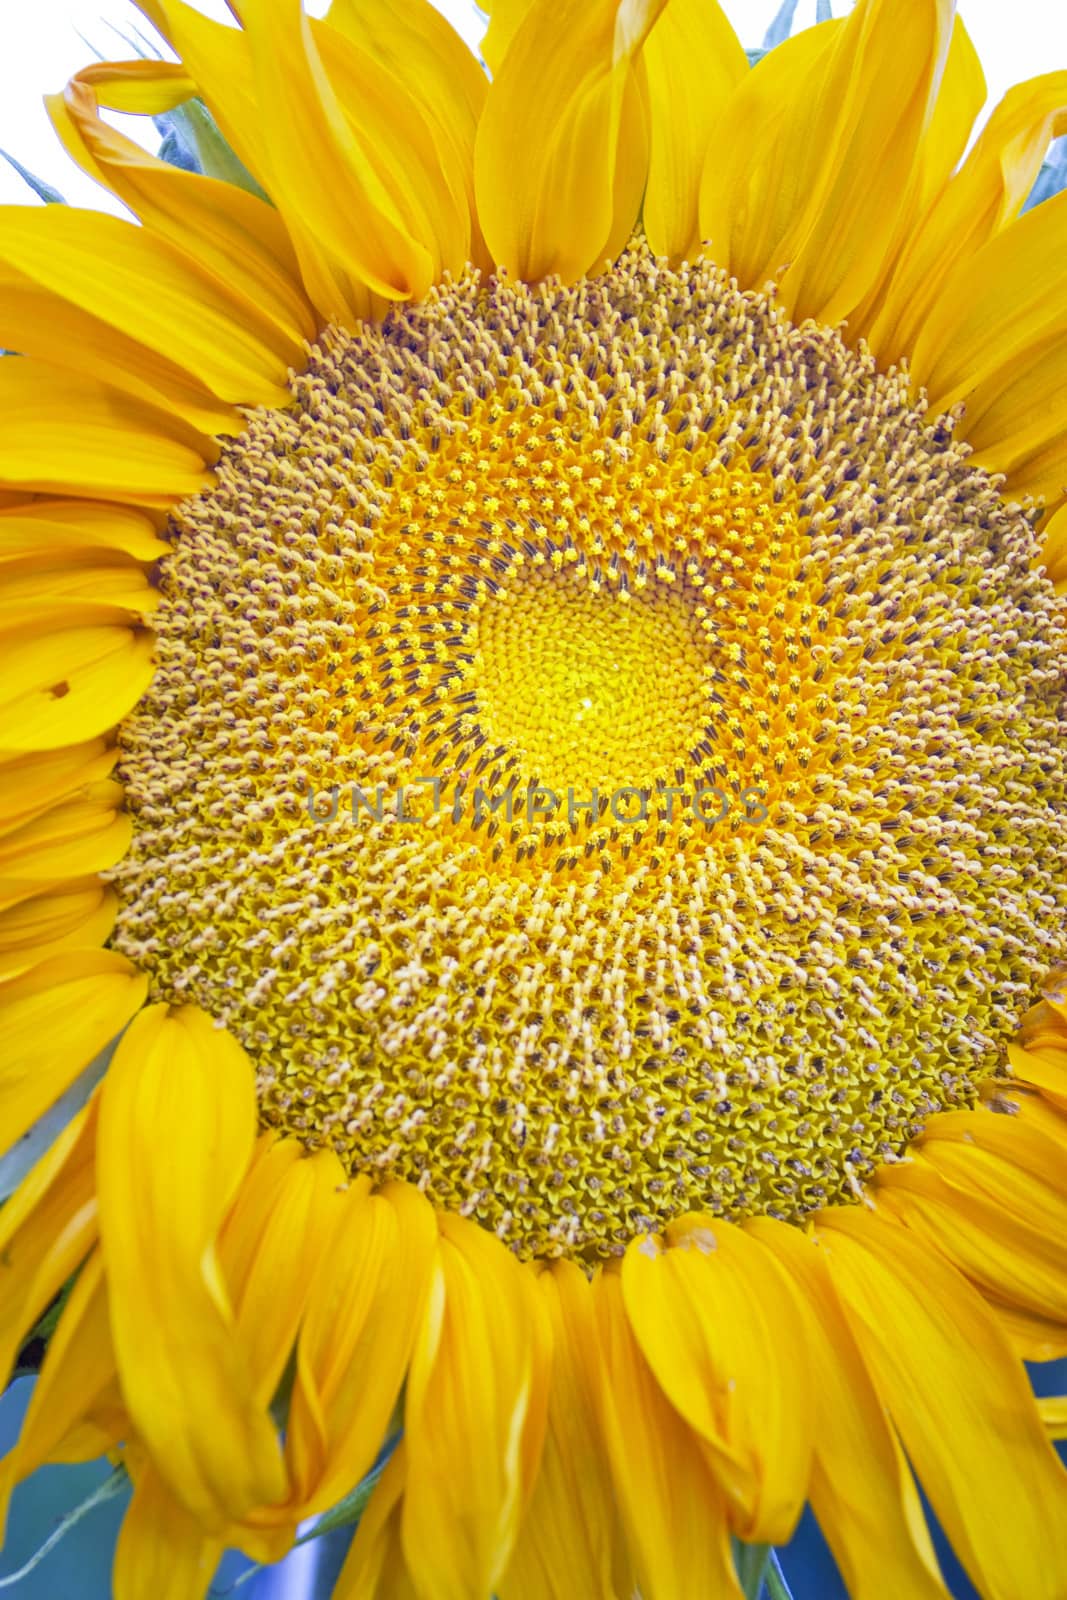 heart in a sunflower by adrenalina